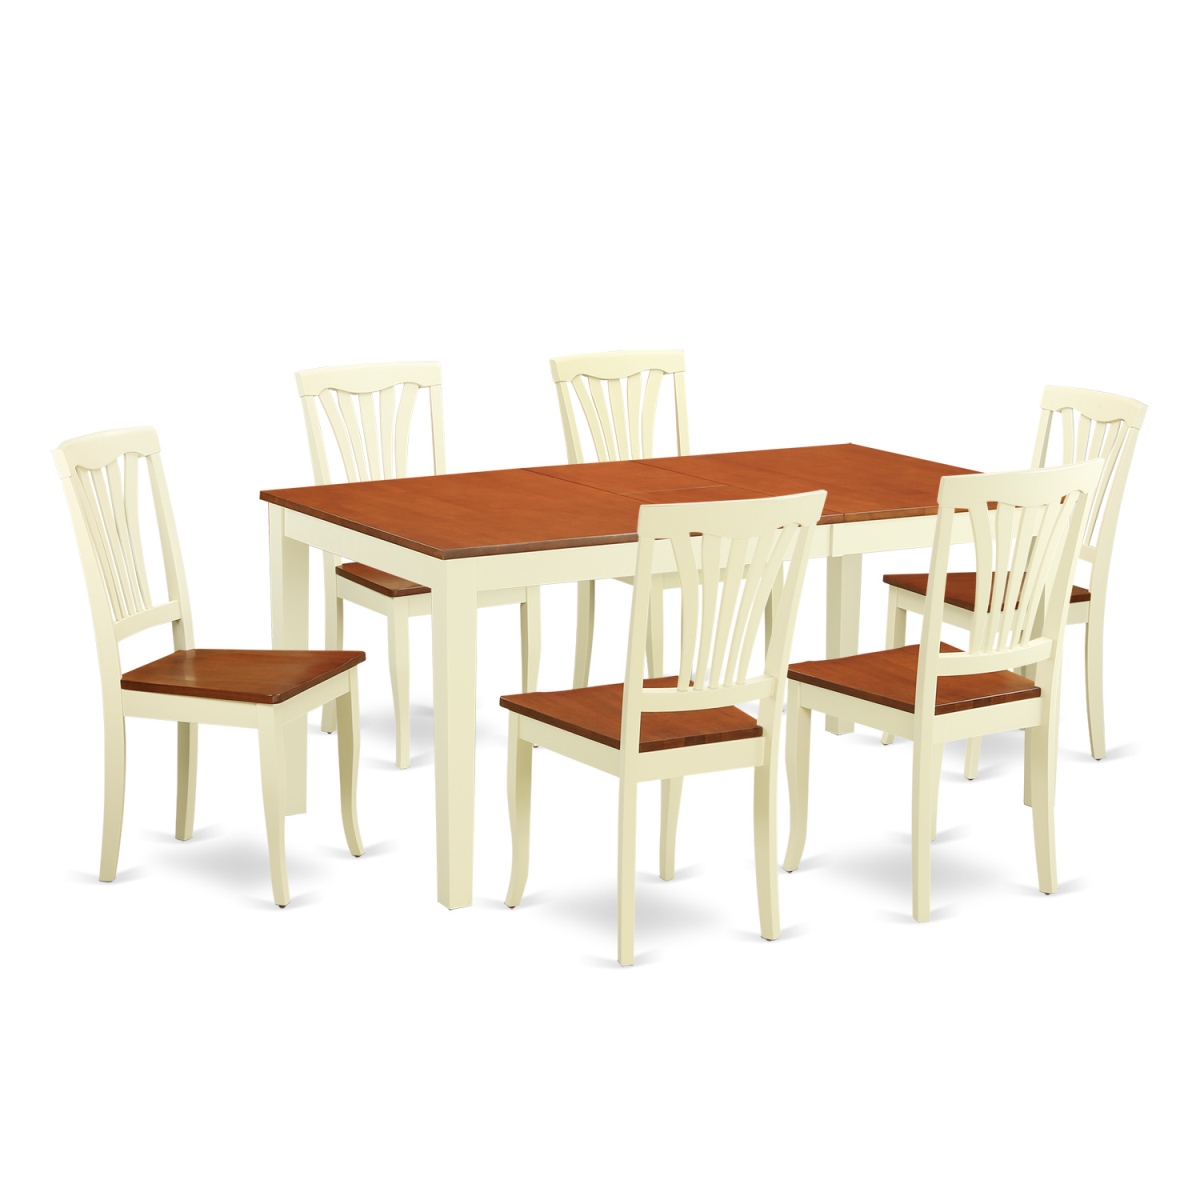 NIAV7-WHI-W Dining Set - Kitchen Table & 6 Chairs, Buttermilk & Cherry - 7 Piece -  East West Furniture